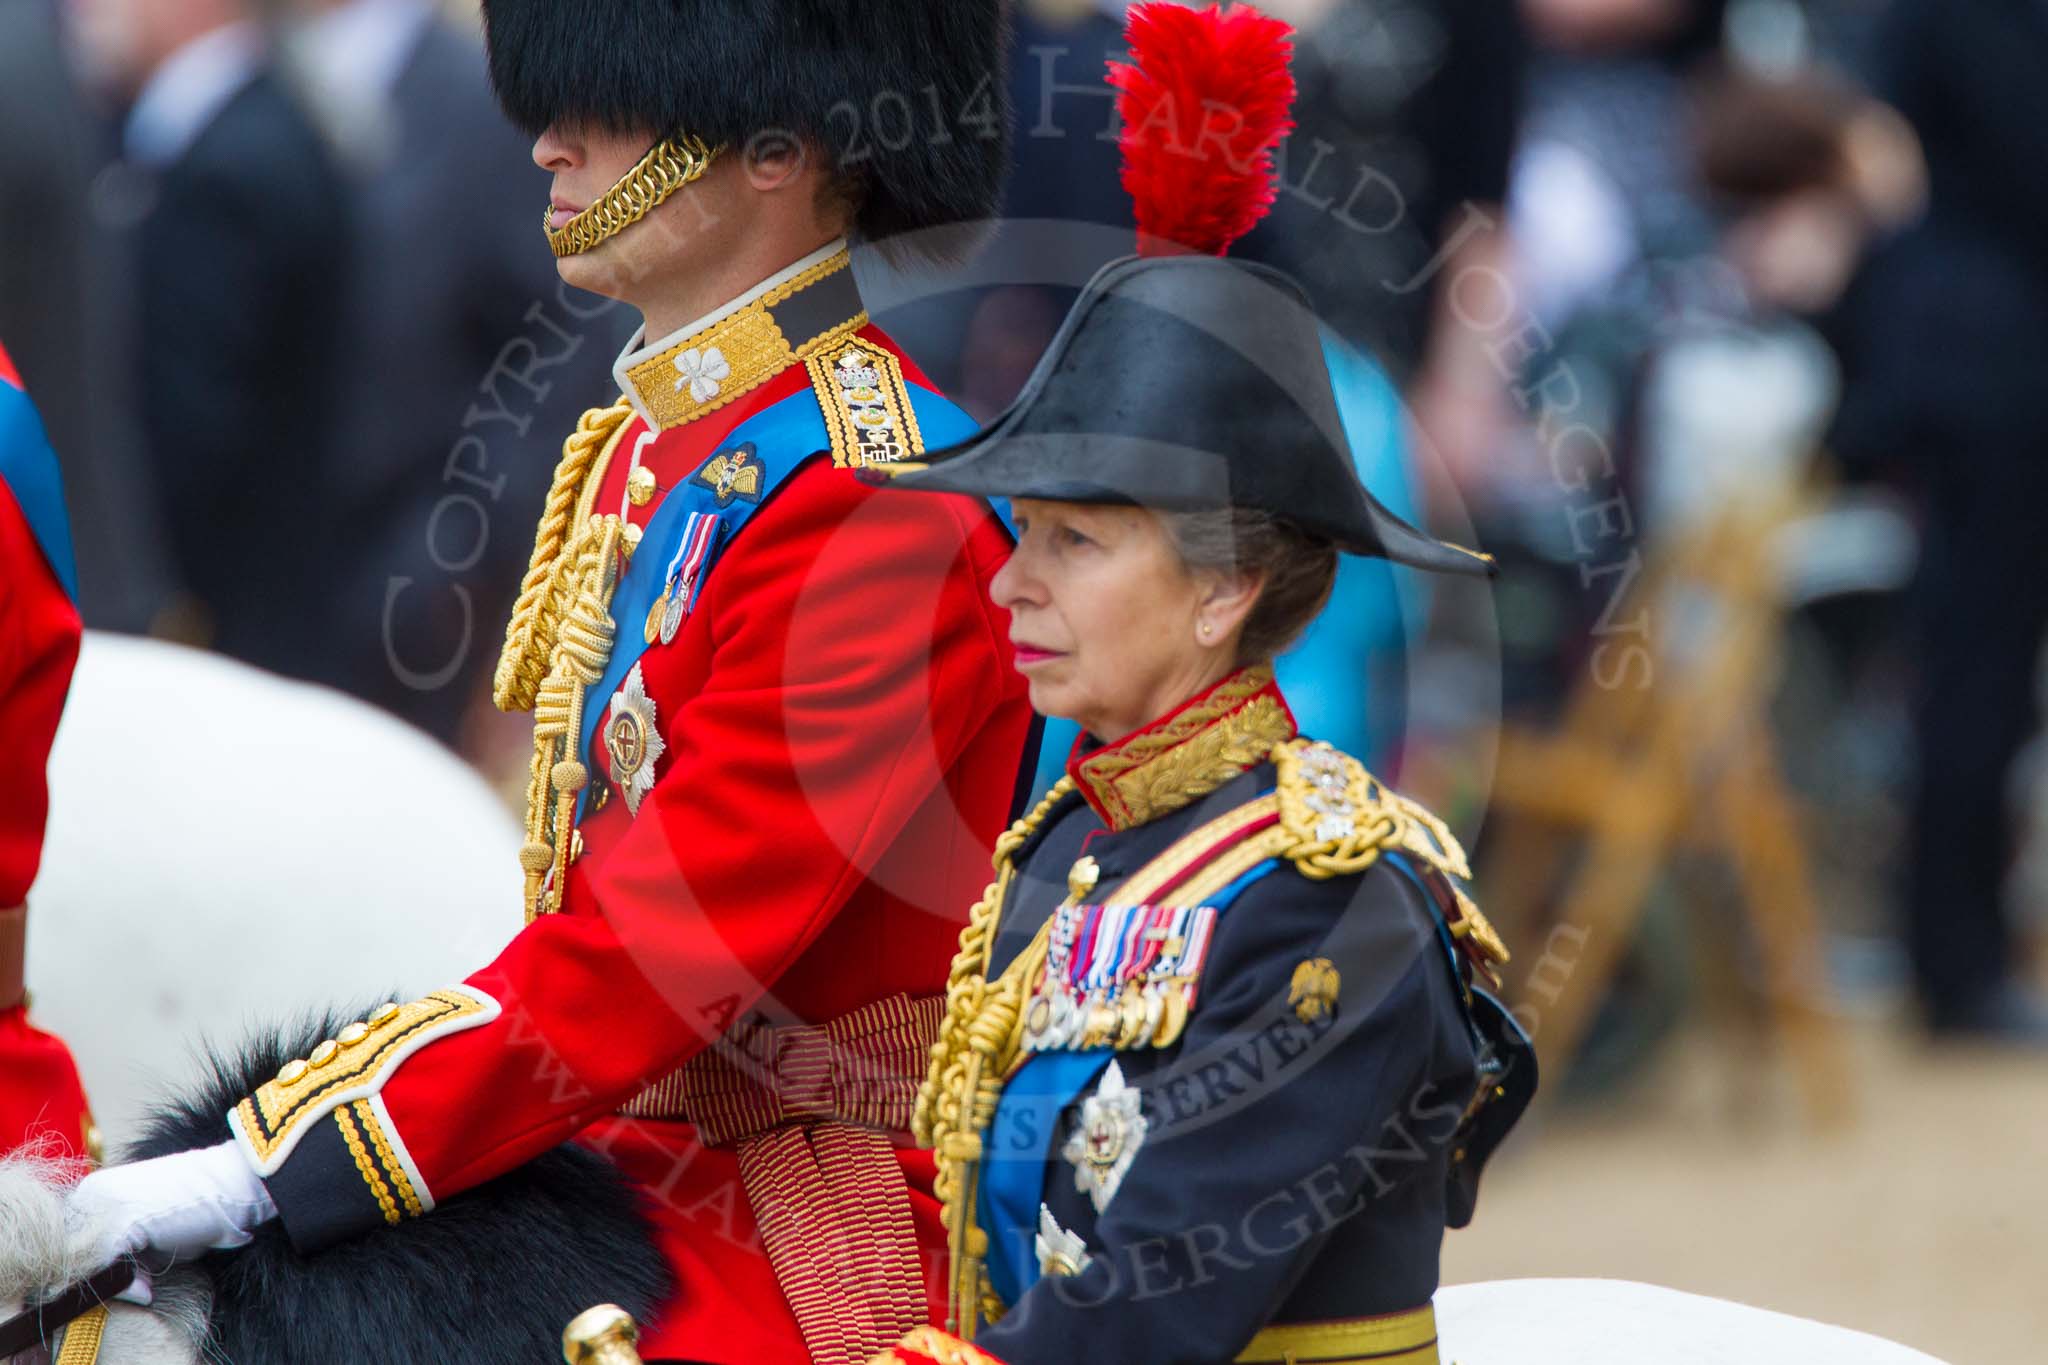 Trooping the Colour 2014.
Horse Guards Parade, Westminster,
London SW1A,

United Kingdom,
on 14 June 2014 at 11:01, image #375